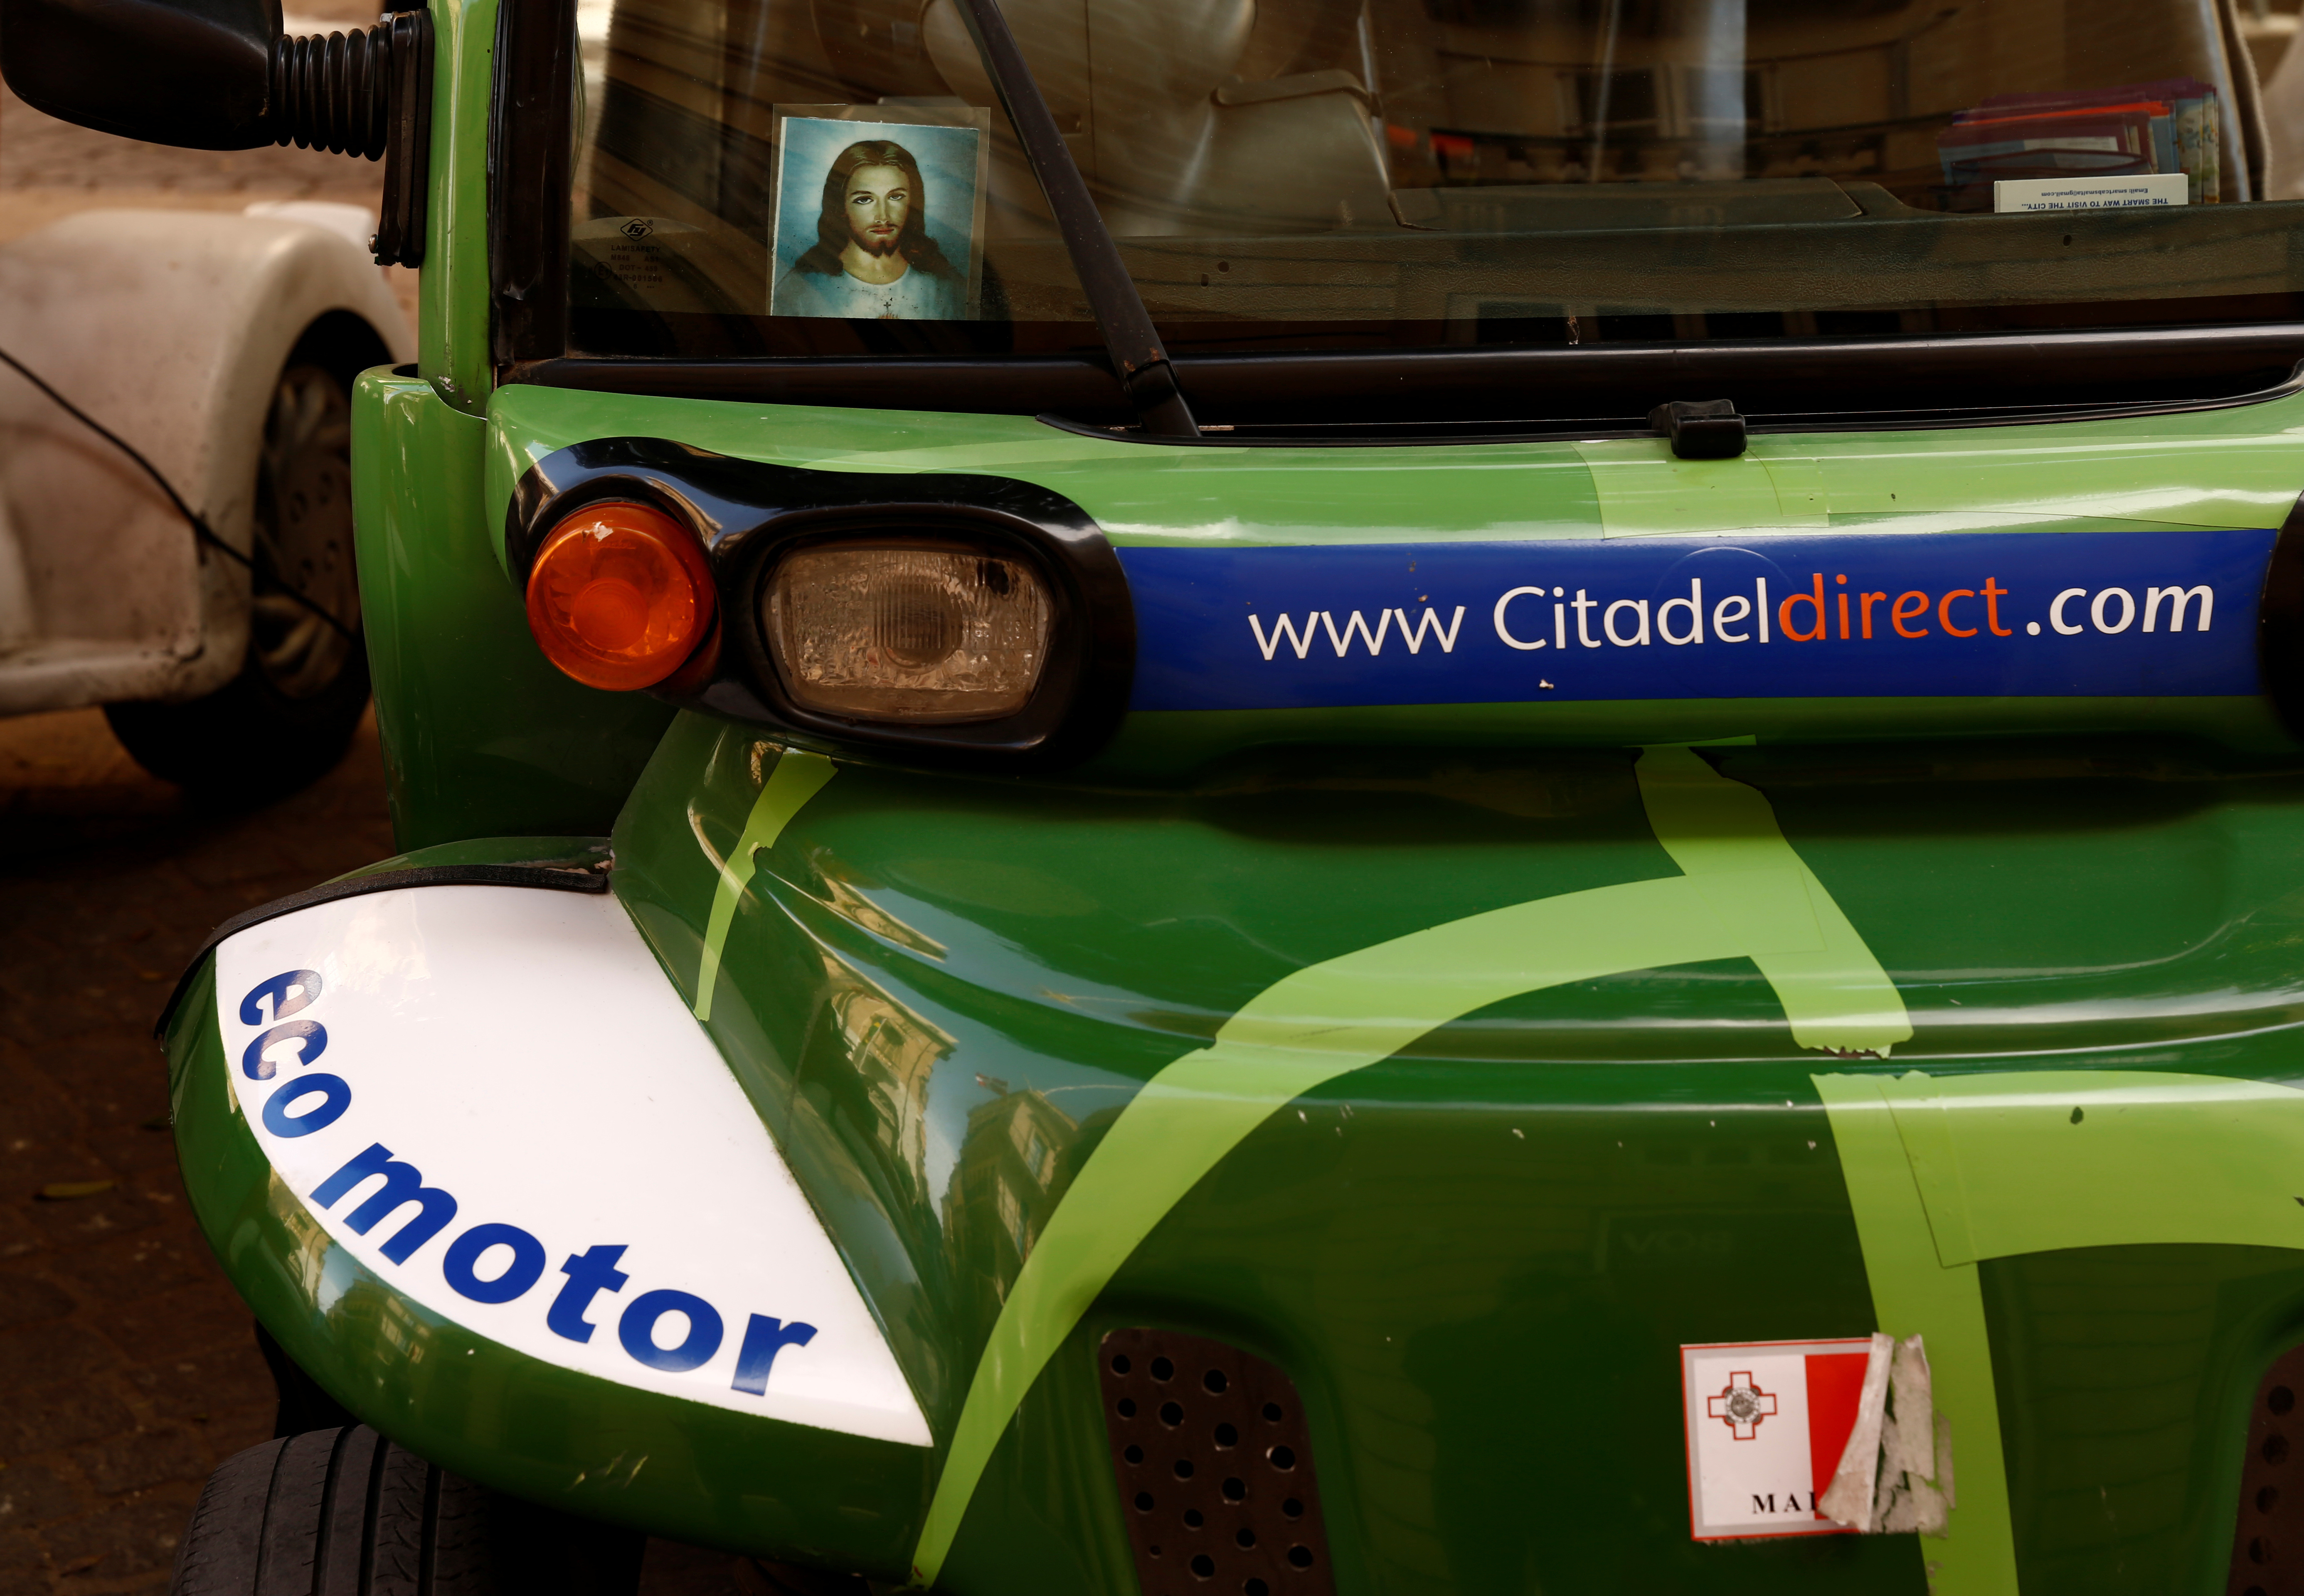 A religious picture showing Jesus Christ is seen behind the windscreen of an electric cab in Valletta